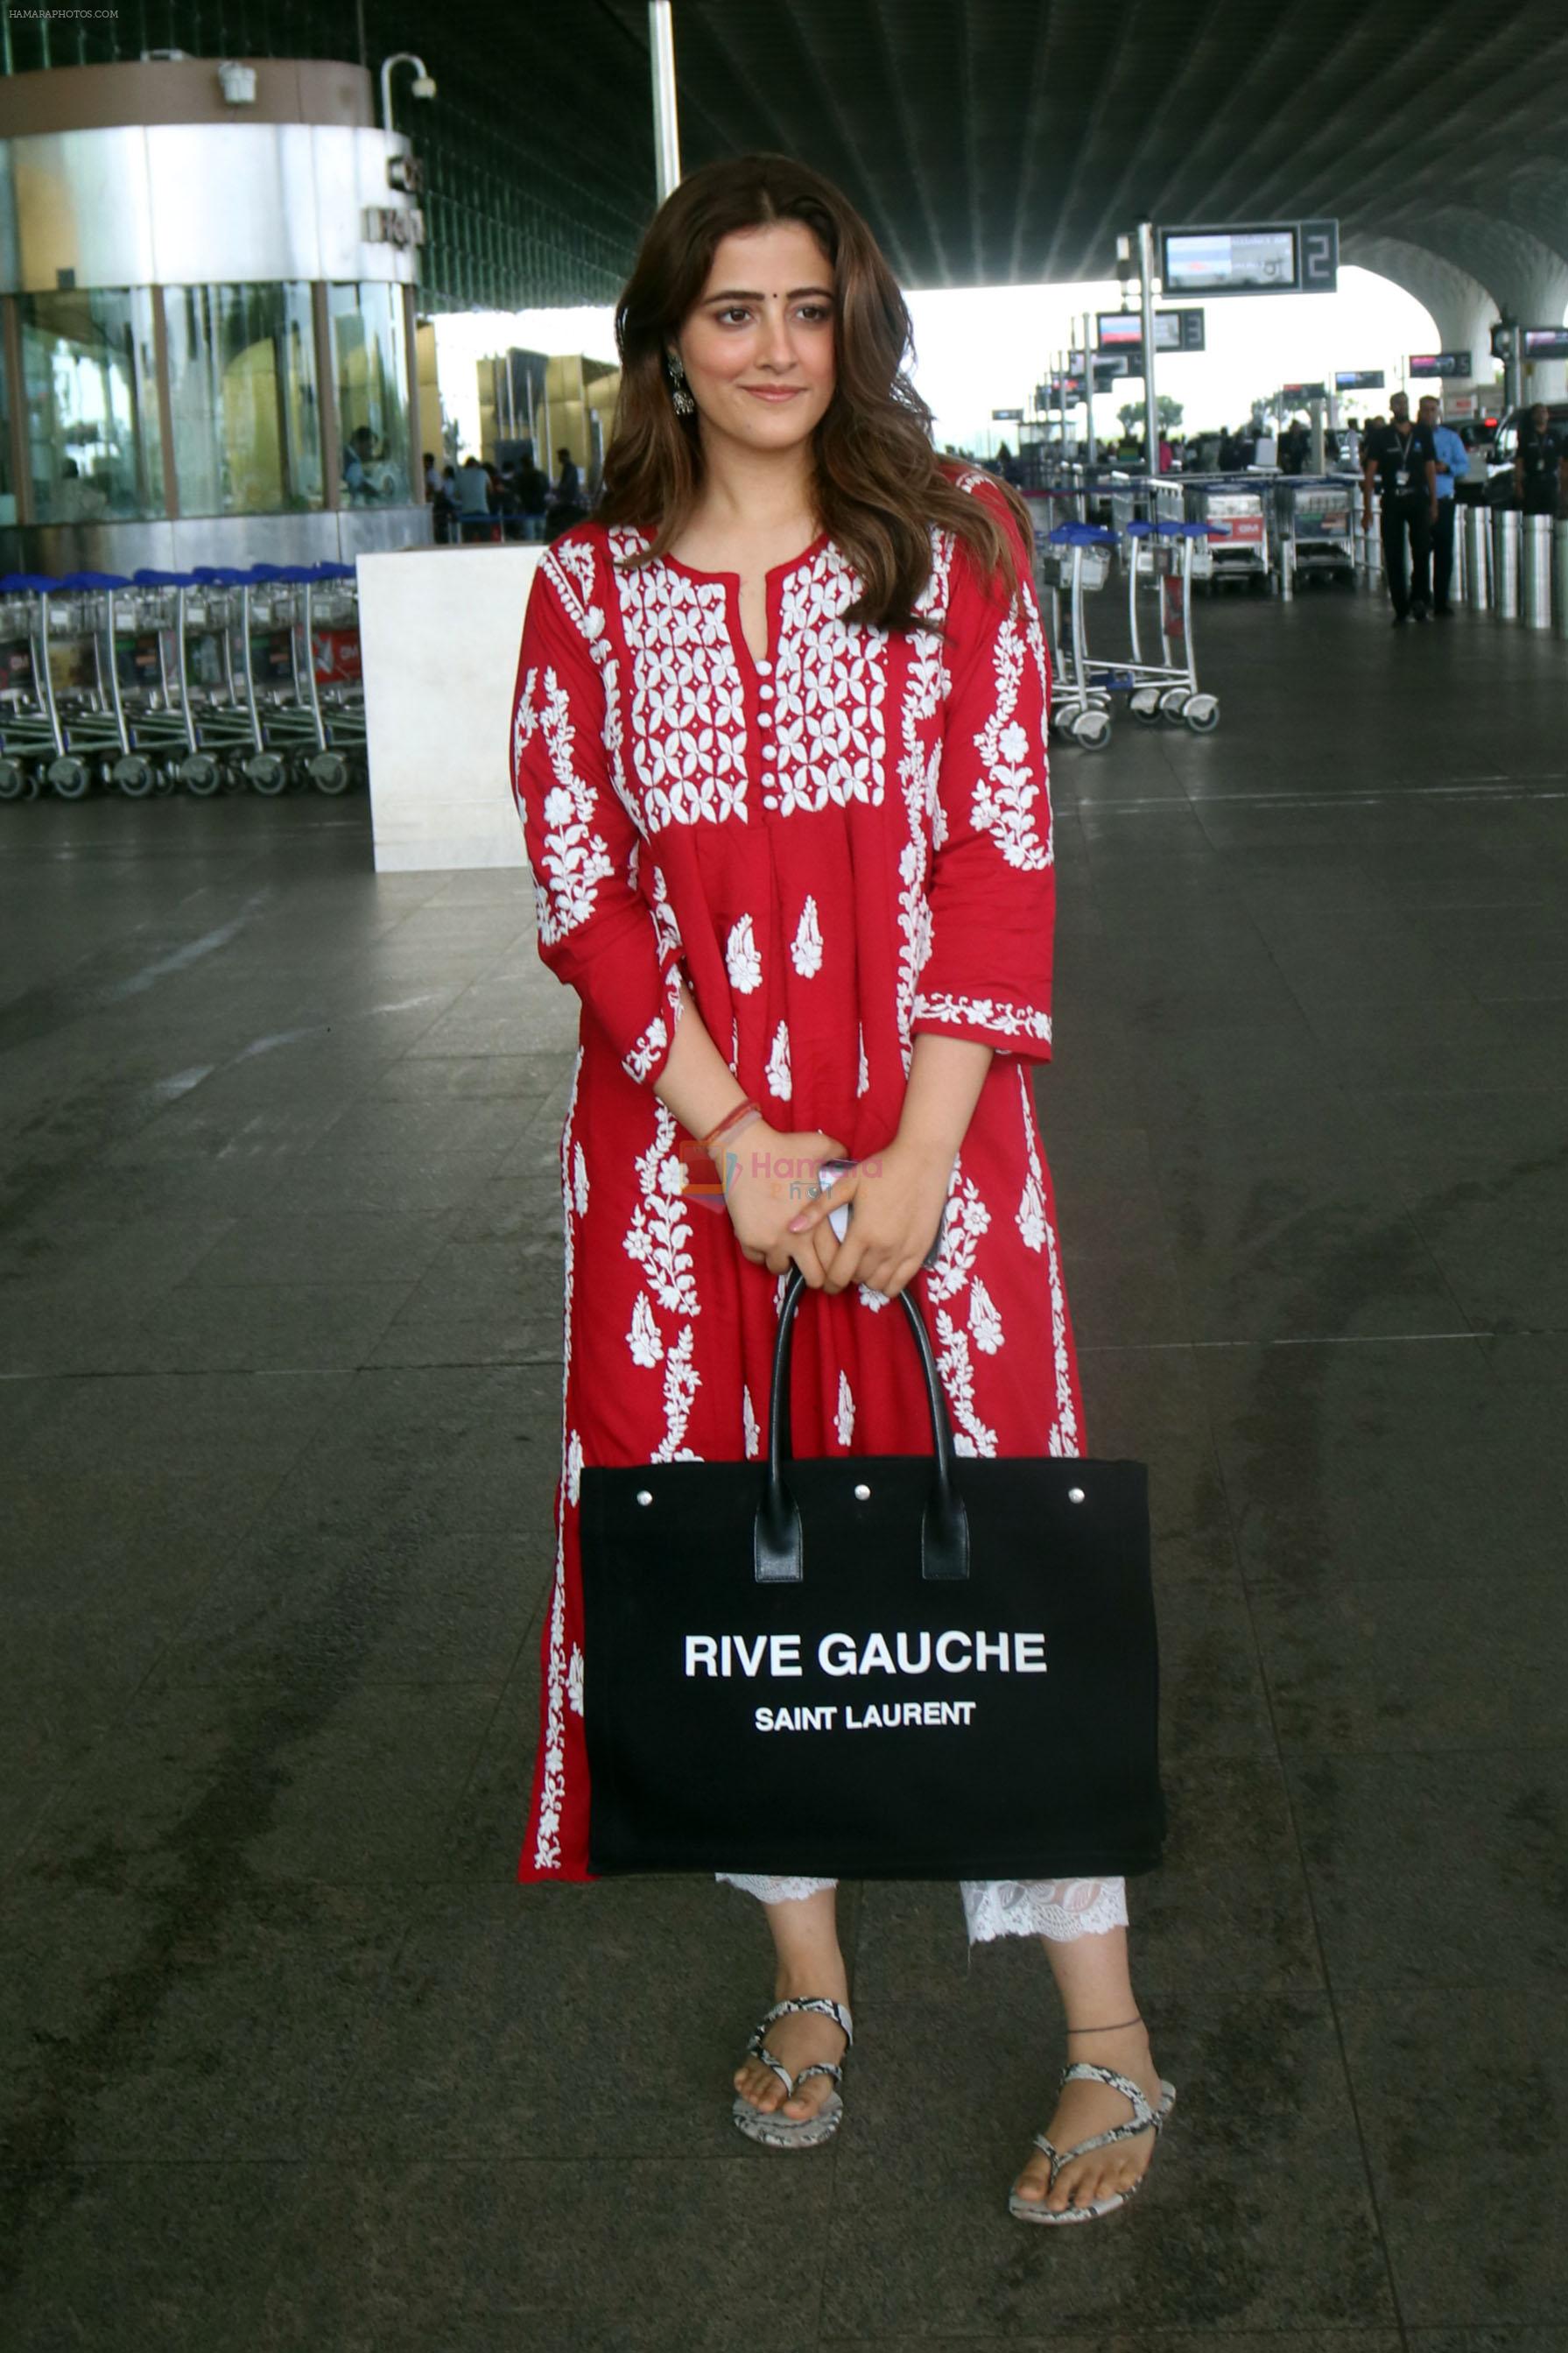 Nupur Sanon seen shinnig in red at the airport holding Saint Laurent handbag on 9 July 2023